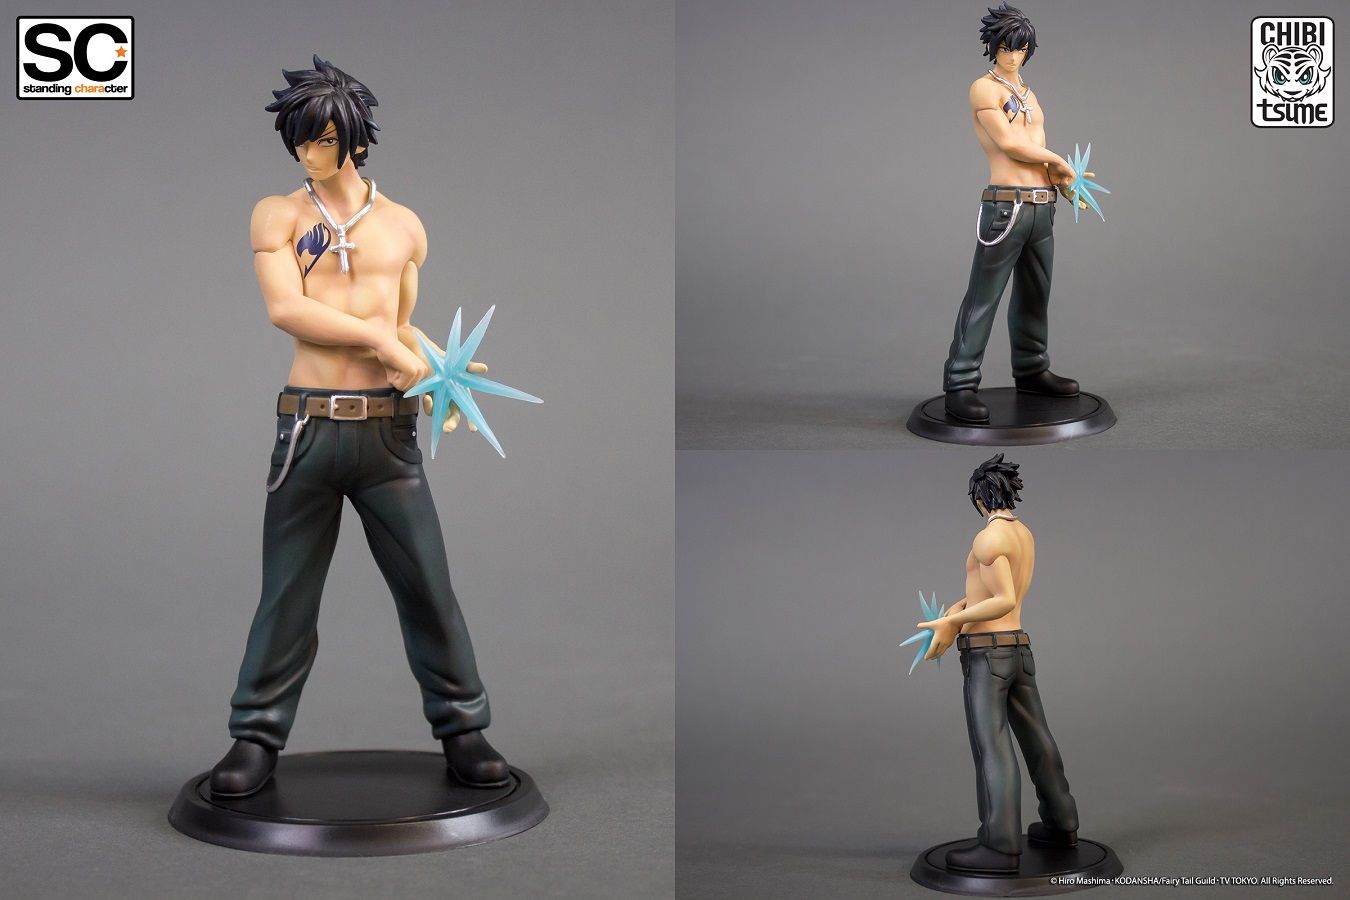 goodie - Grey Fullbuster - SC - Standing Characters - Tsume